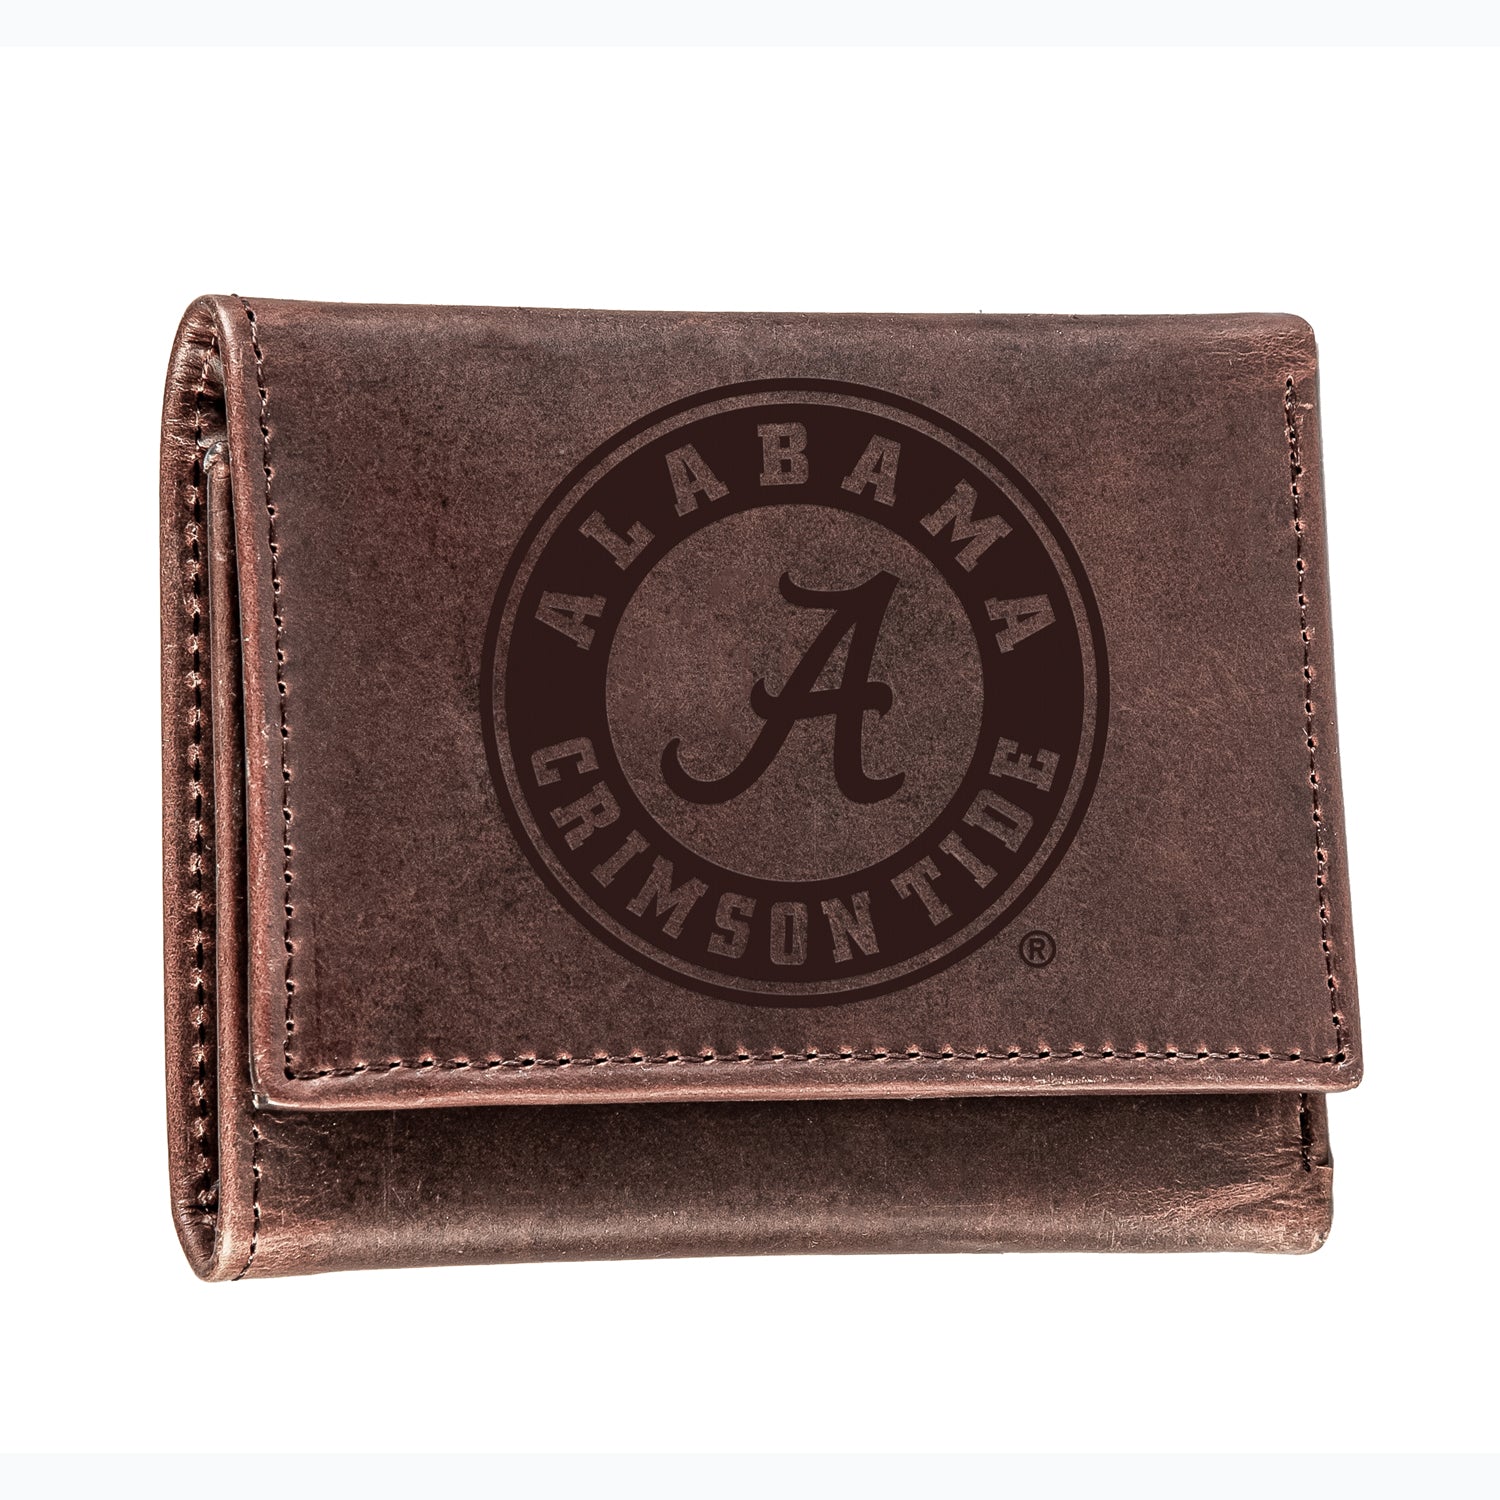 Alabama Trifold Leather Wallet, Brown, 100% Genuine Leather